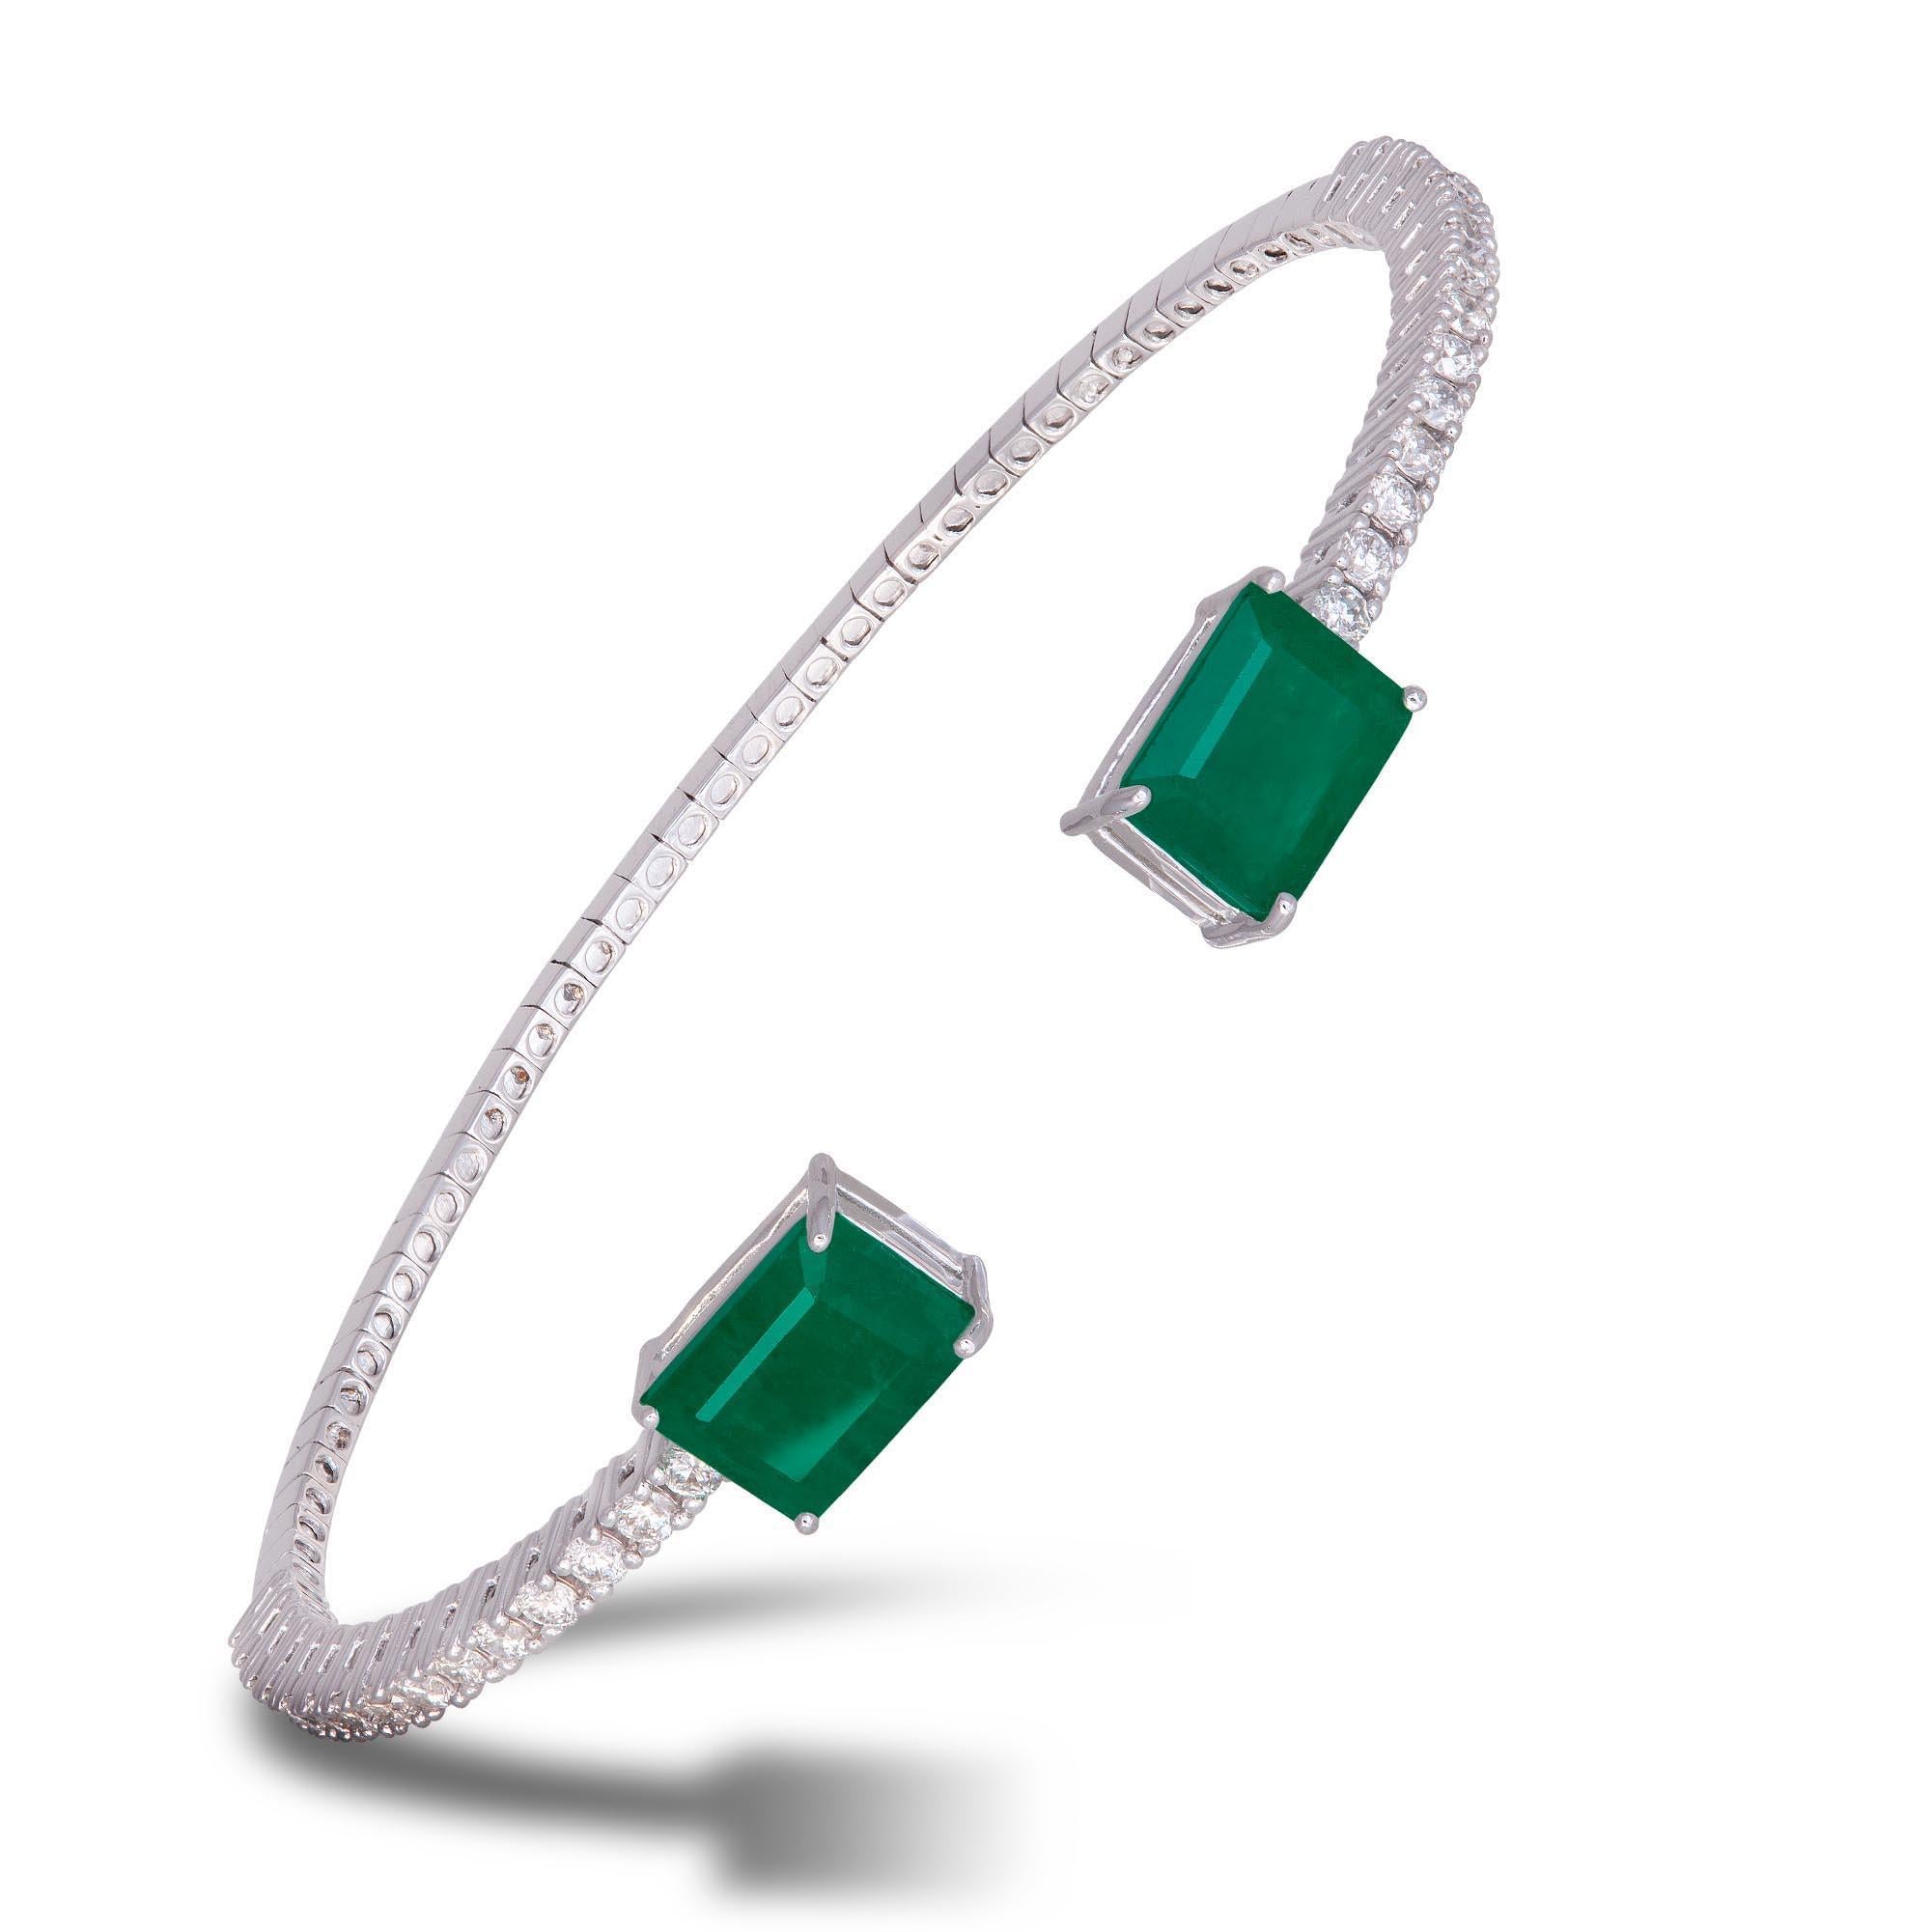 Diamond Bangle Bracelet 18K White Gold Diamond 0.77 Cts/30 Pcs Emerald 3.18 Cts In New Condition For Sale In Montreux, CH